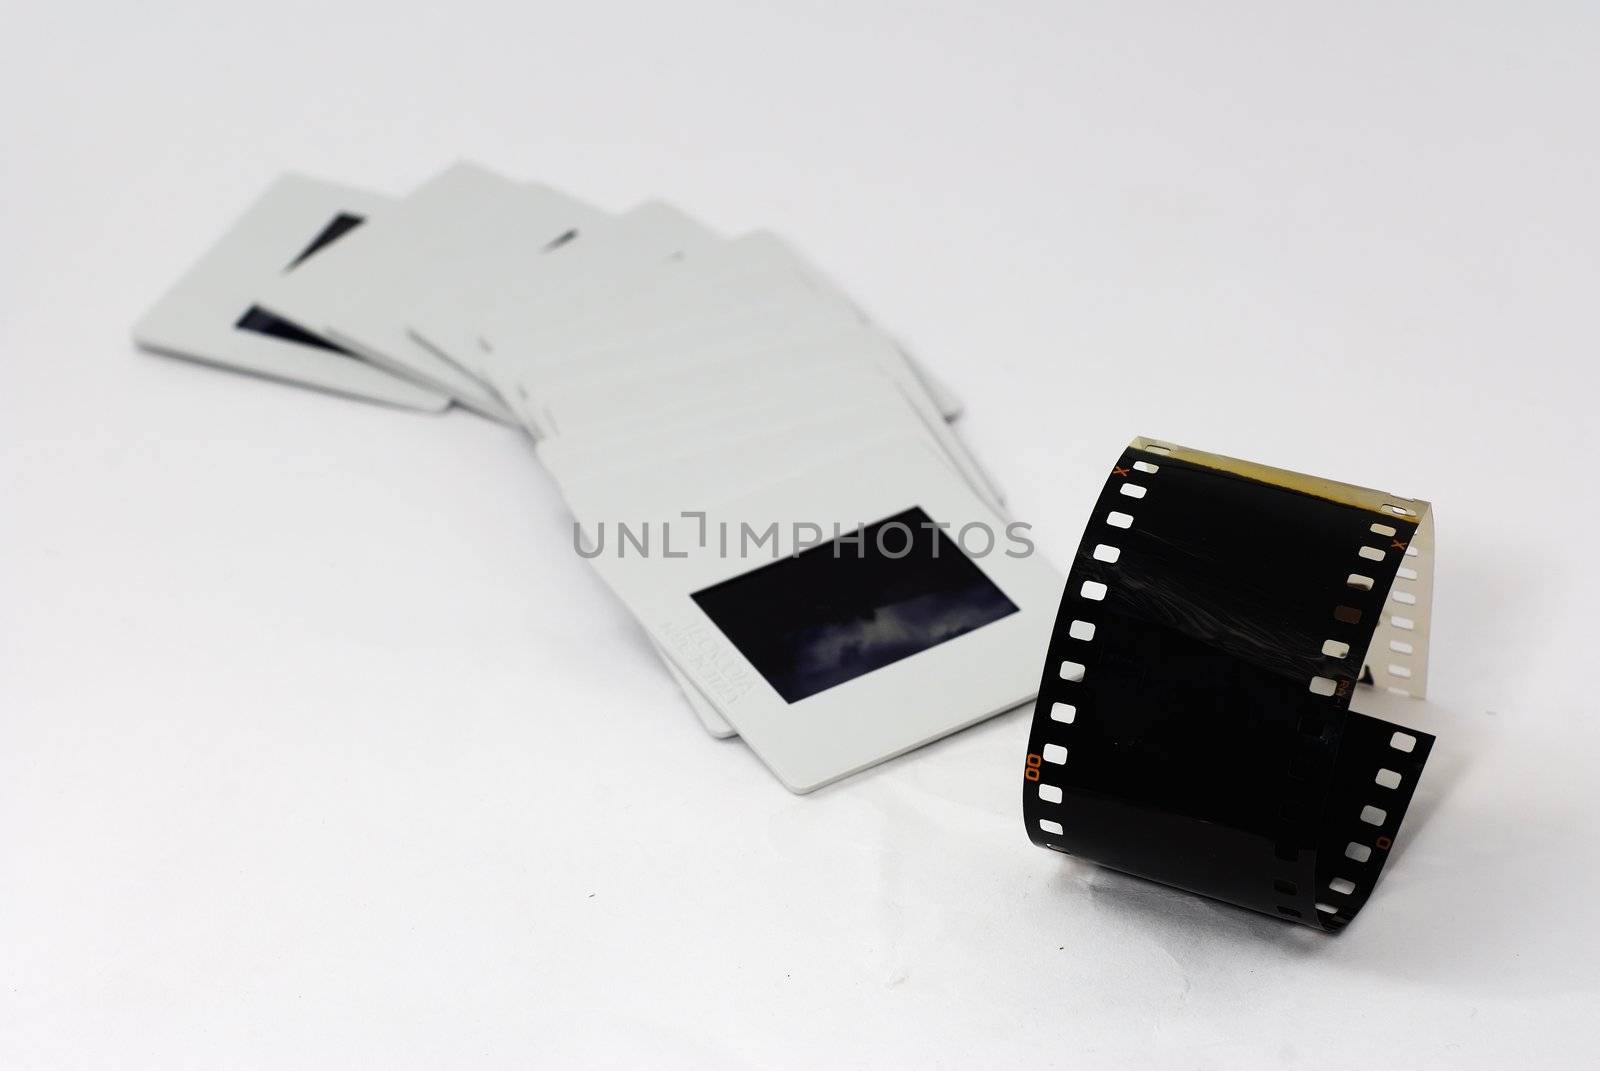 Positive film is put into a white frame to protect picture.